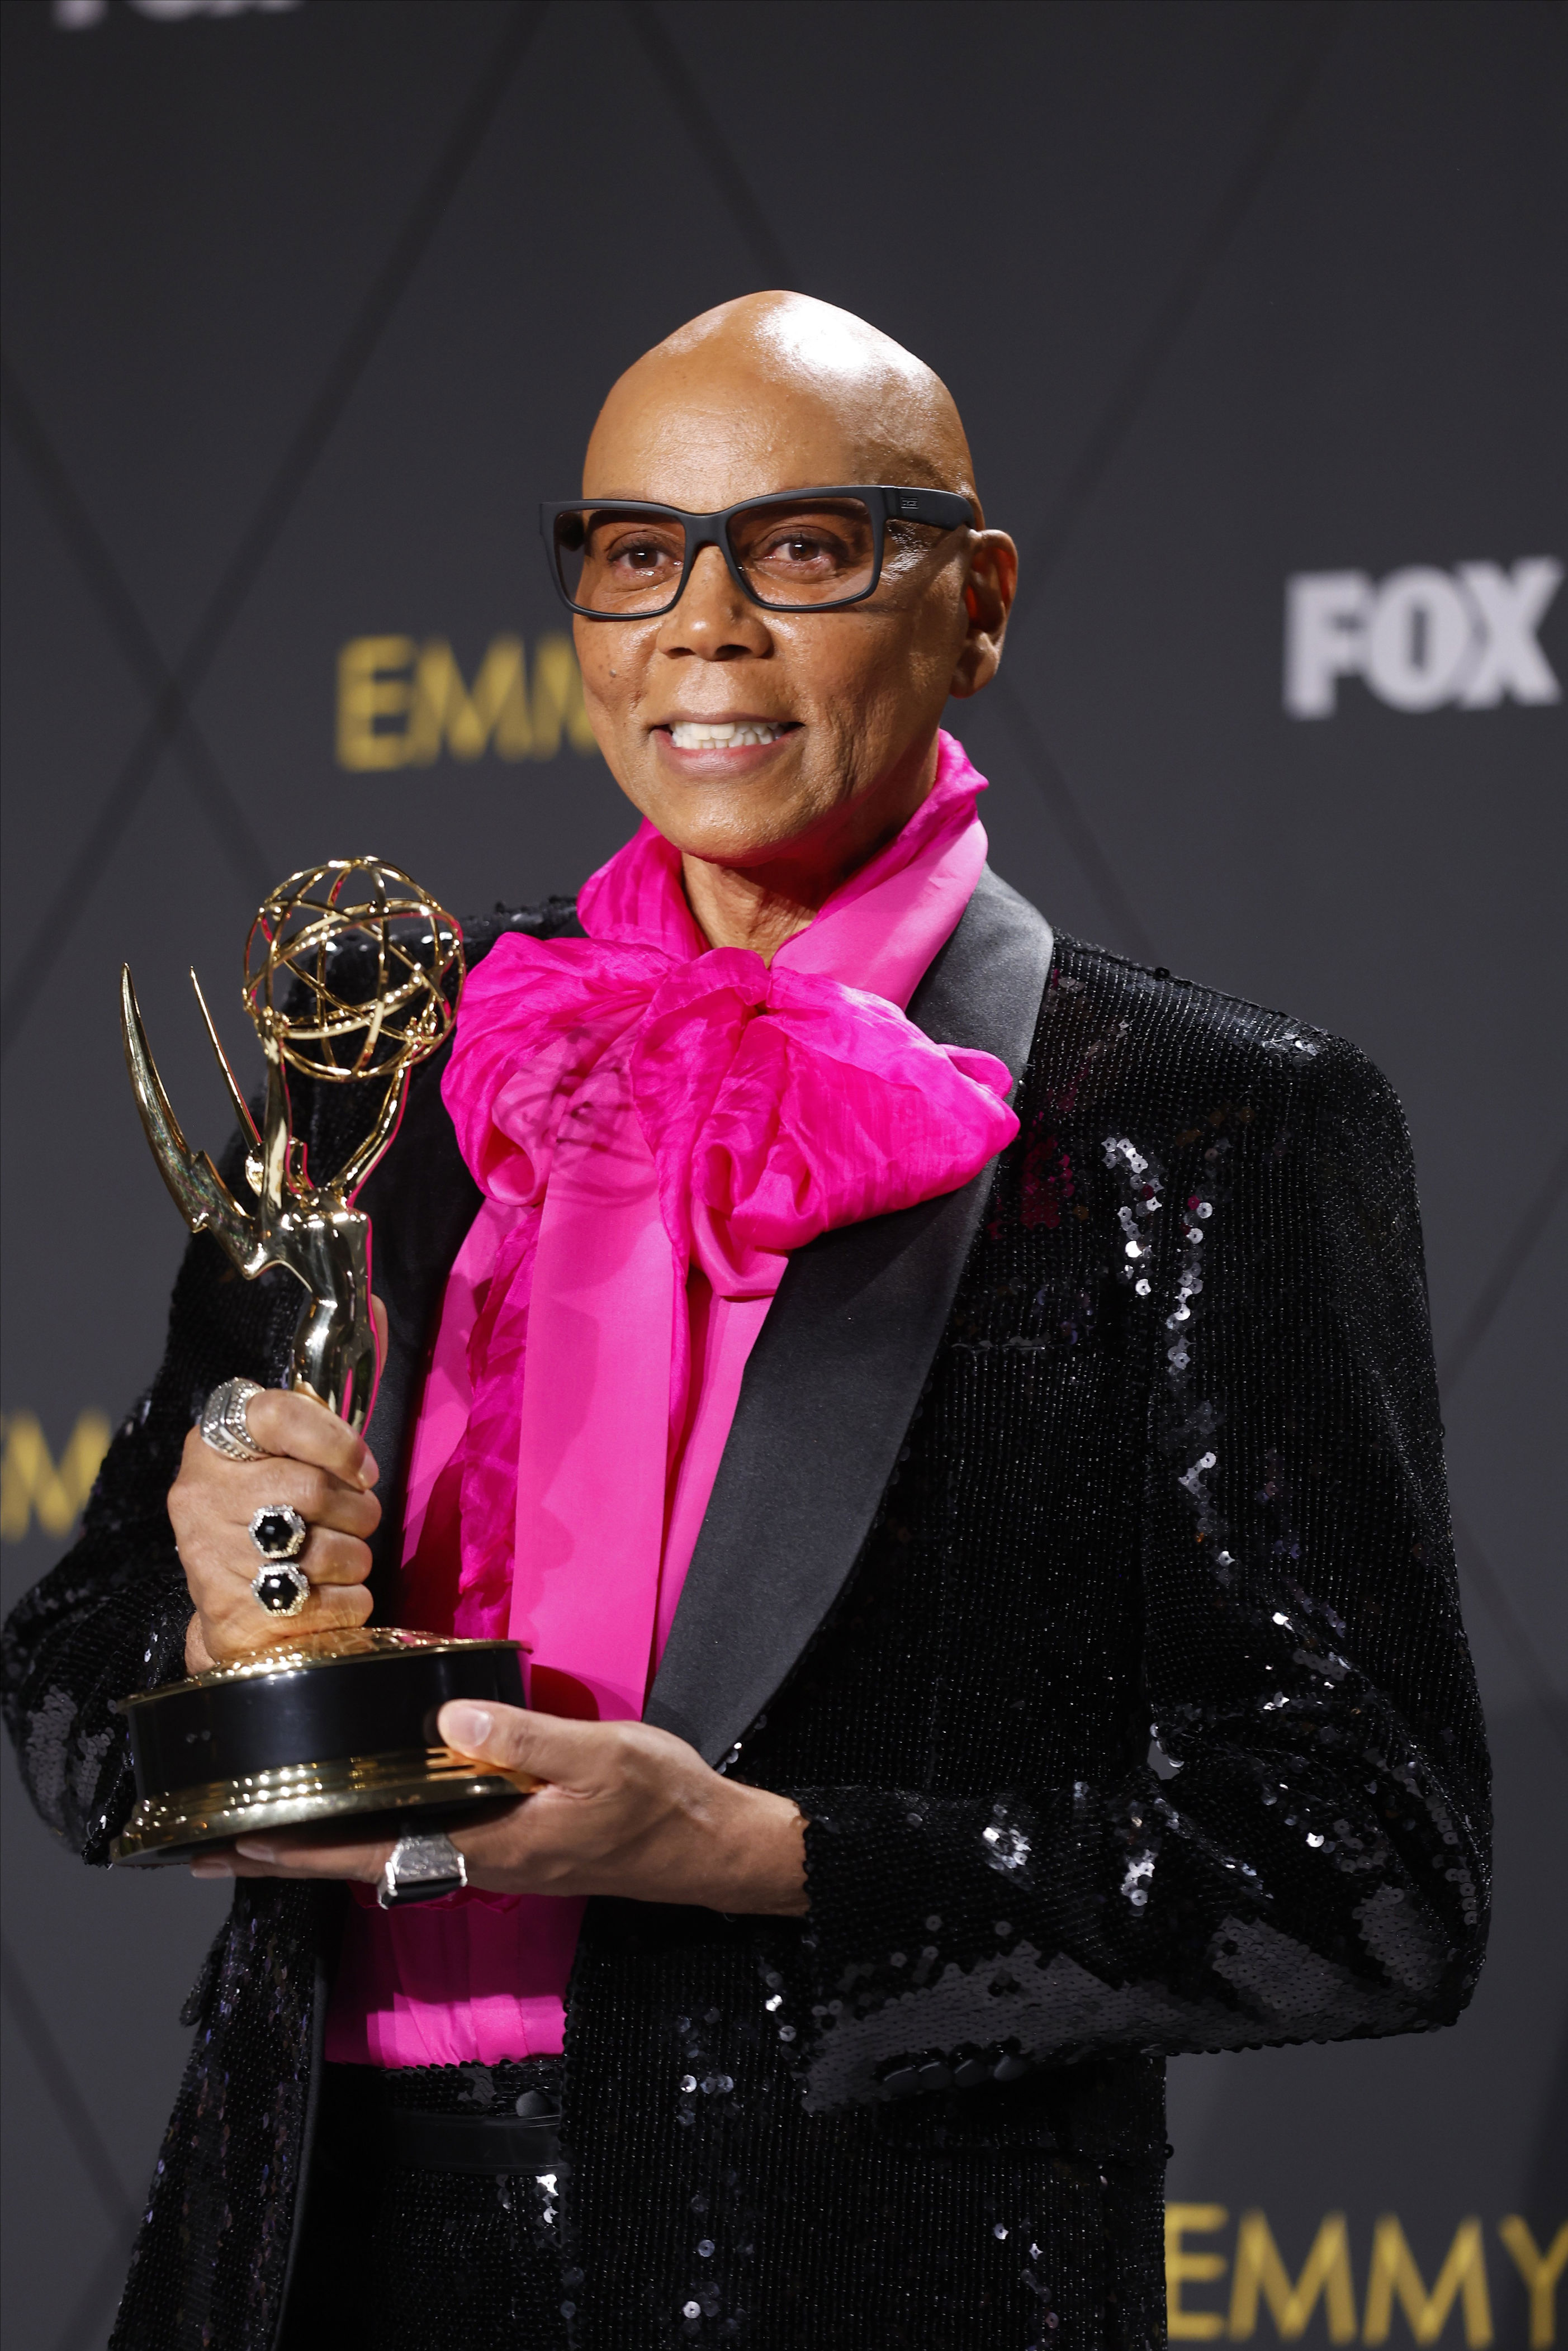 <p>In September 2021, RuPaul sashayed into the history books: The performer and producer claimed his 11th Emmy Award when his show "RuPaul's Drag Race" won for best competition program — <a href="https://www.wonderwall.com/awards-events/emmys/emmys-cant-miss-moments-in-real-time-499254.gallery?photoId=499883">making him the most decorated Black artist in Emmys history</a>. As of 2024, he has 14 Emmy wins to his name.</p>